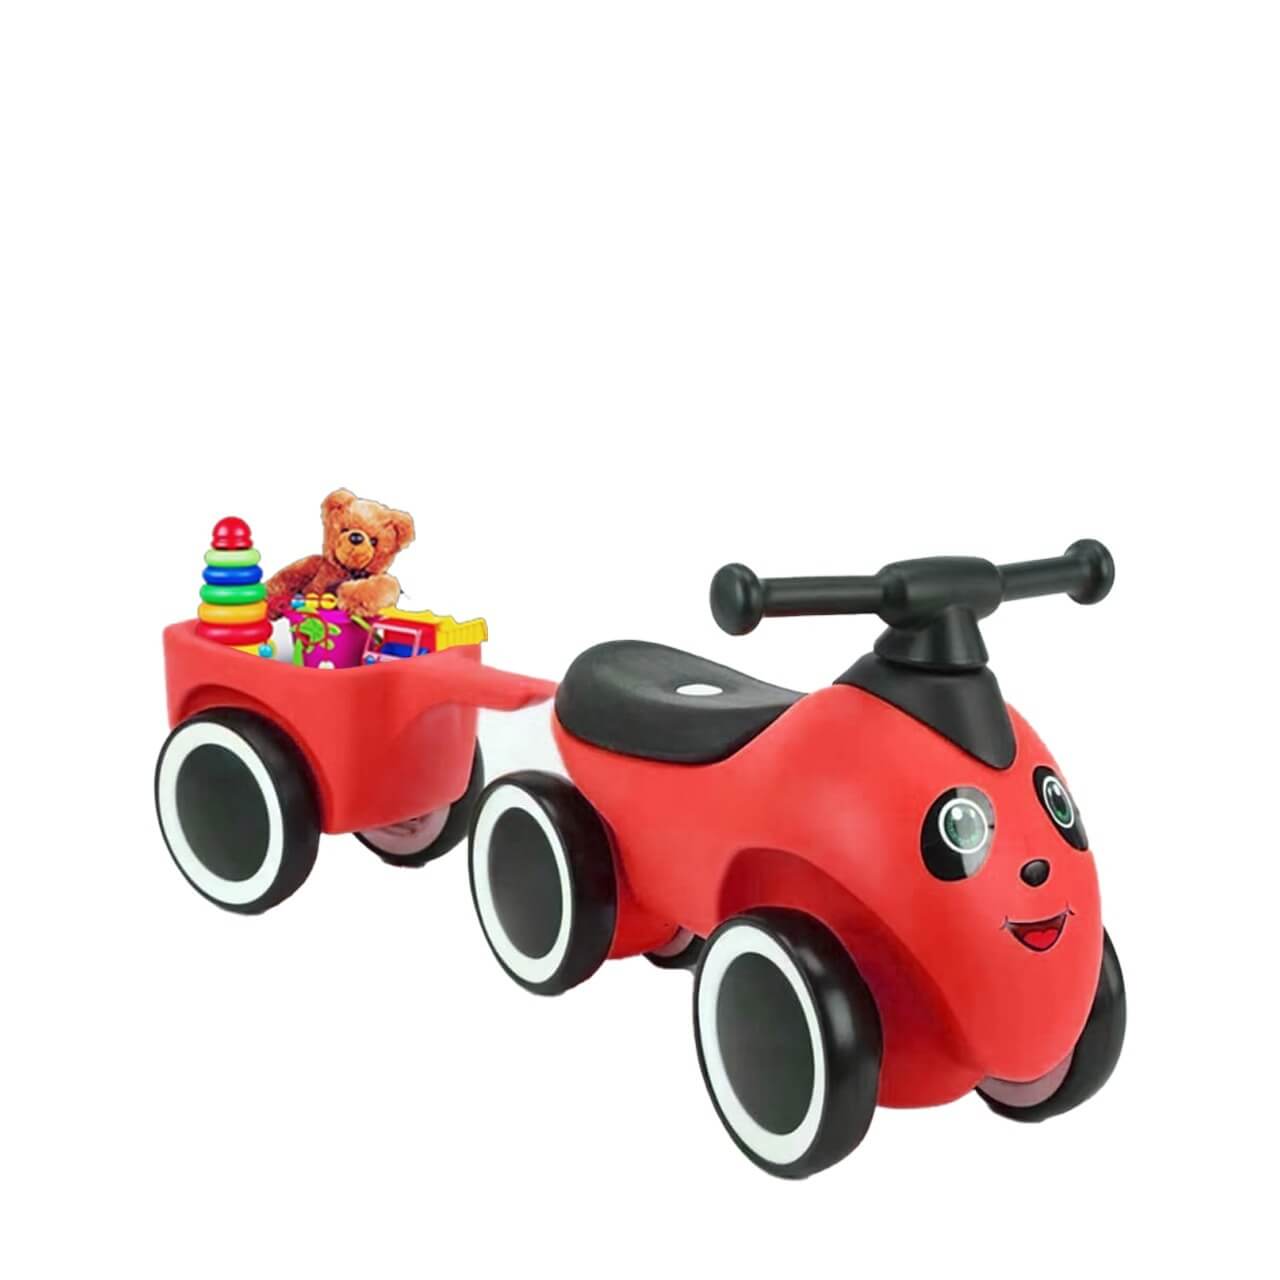 Ride along  Red  Push car with trailor for toys